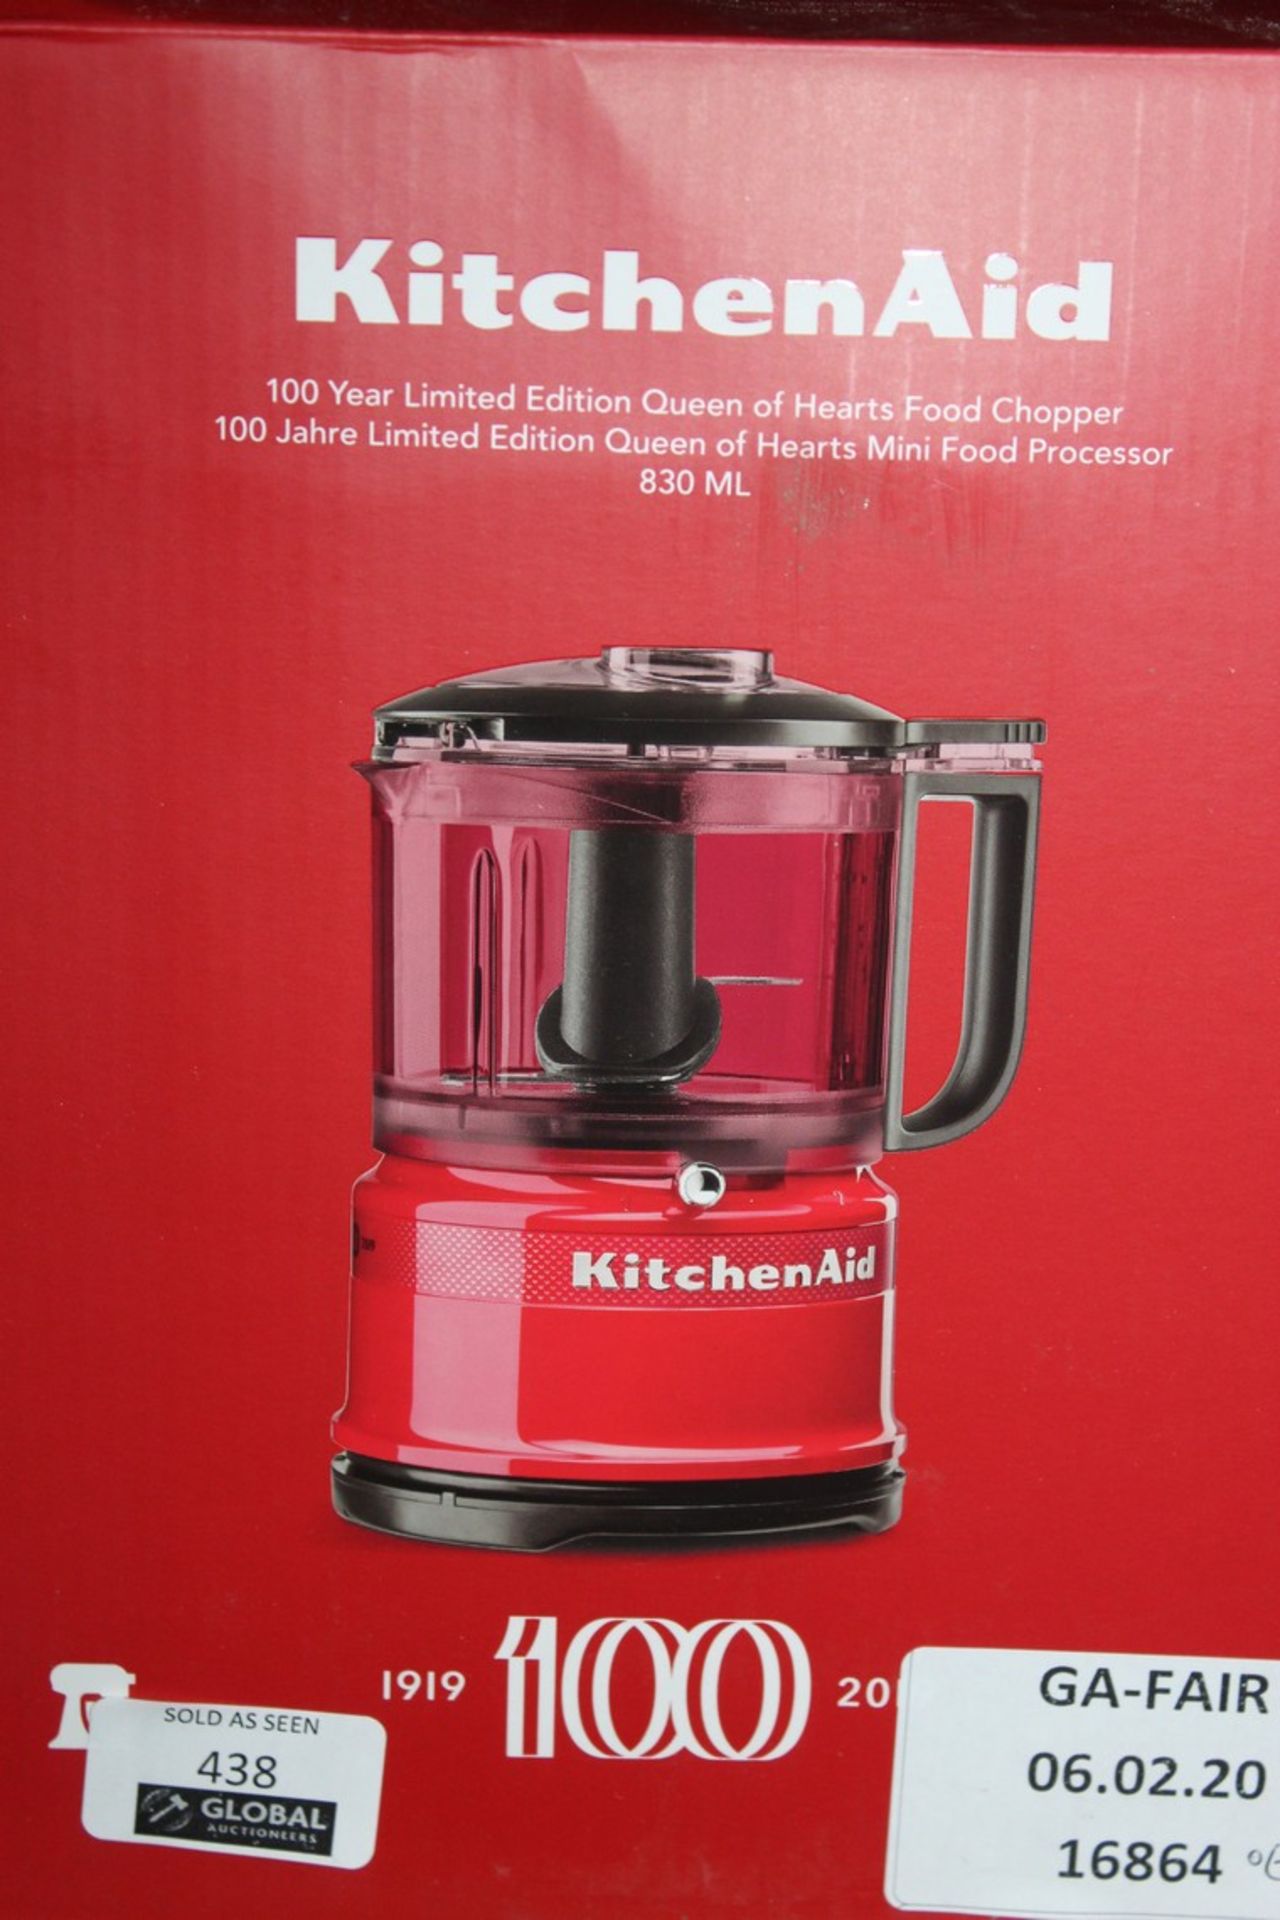 Boxed 830ml Kitchen Aid Mini Food Chopper RRP £60 (16864) (Public Viewing and Appraisals Available)